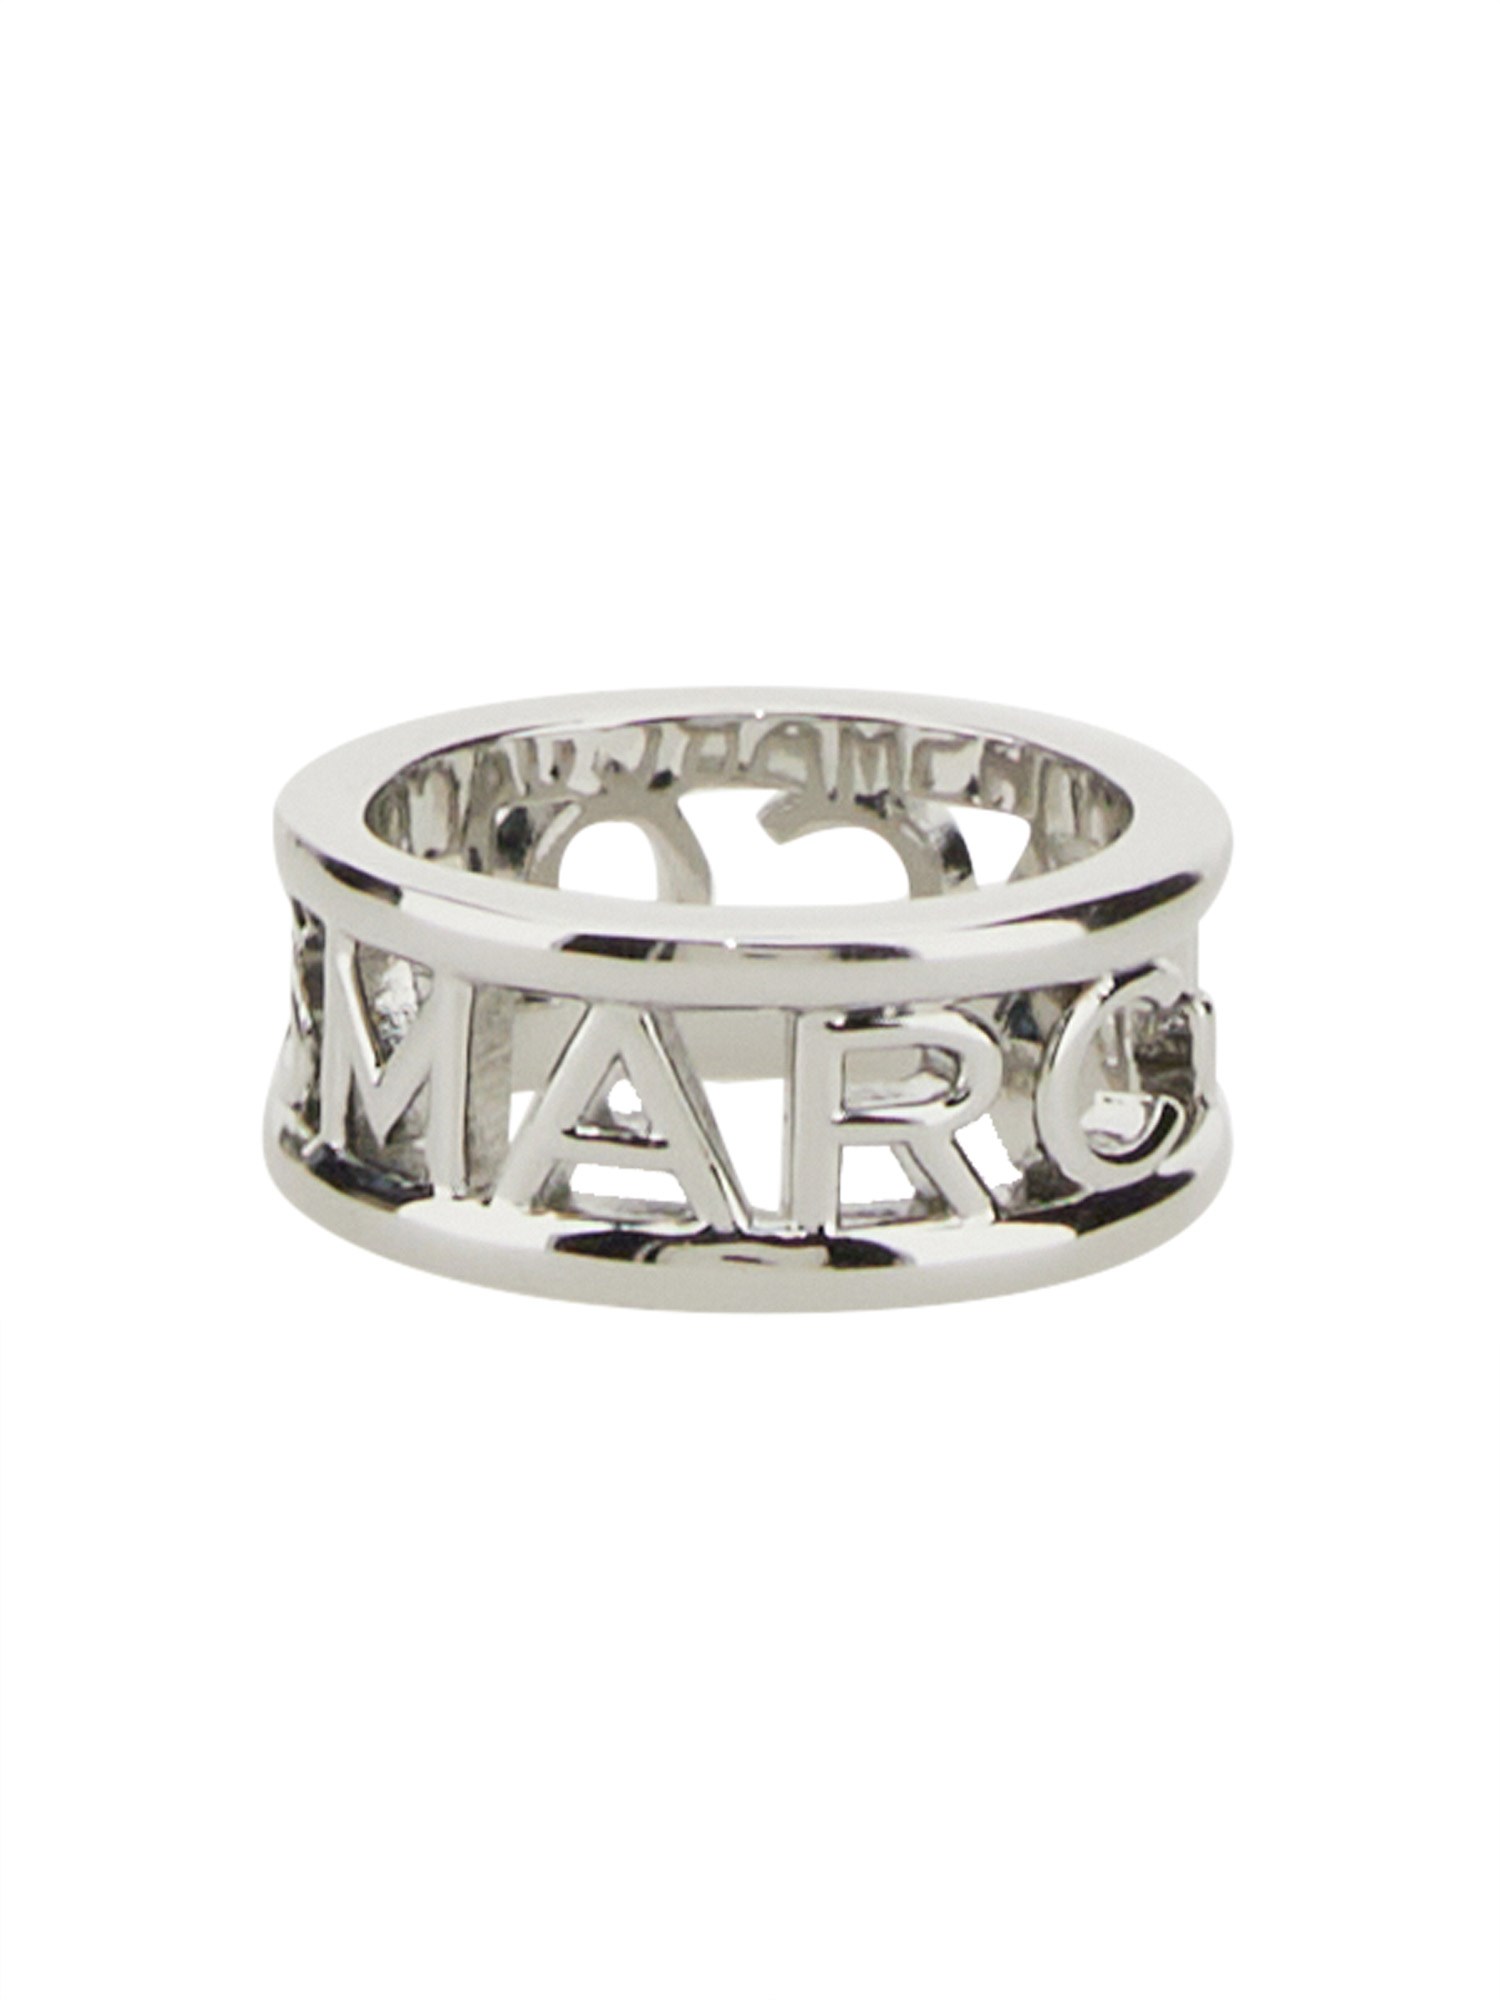 marc jacobs the monogram ring